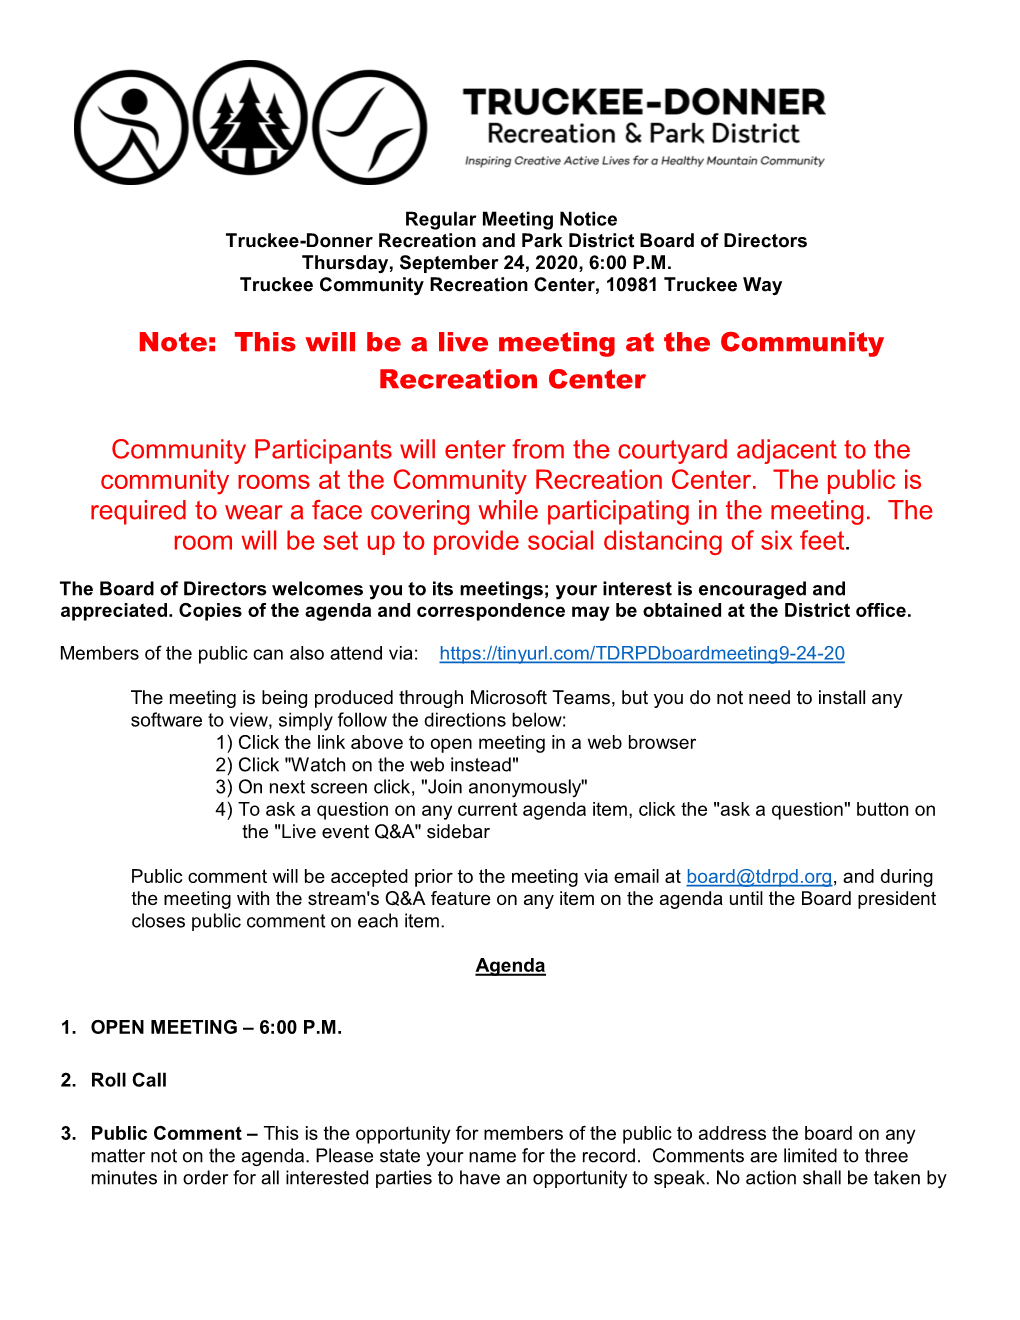 Note: This Will Be a Live Meeting at the Community Recreation Center